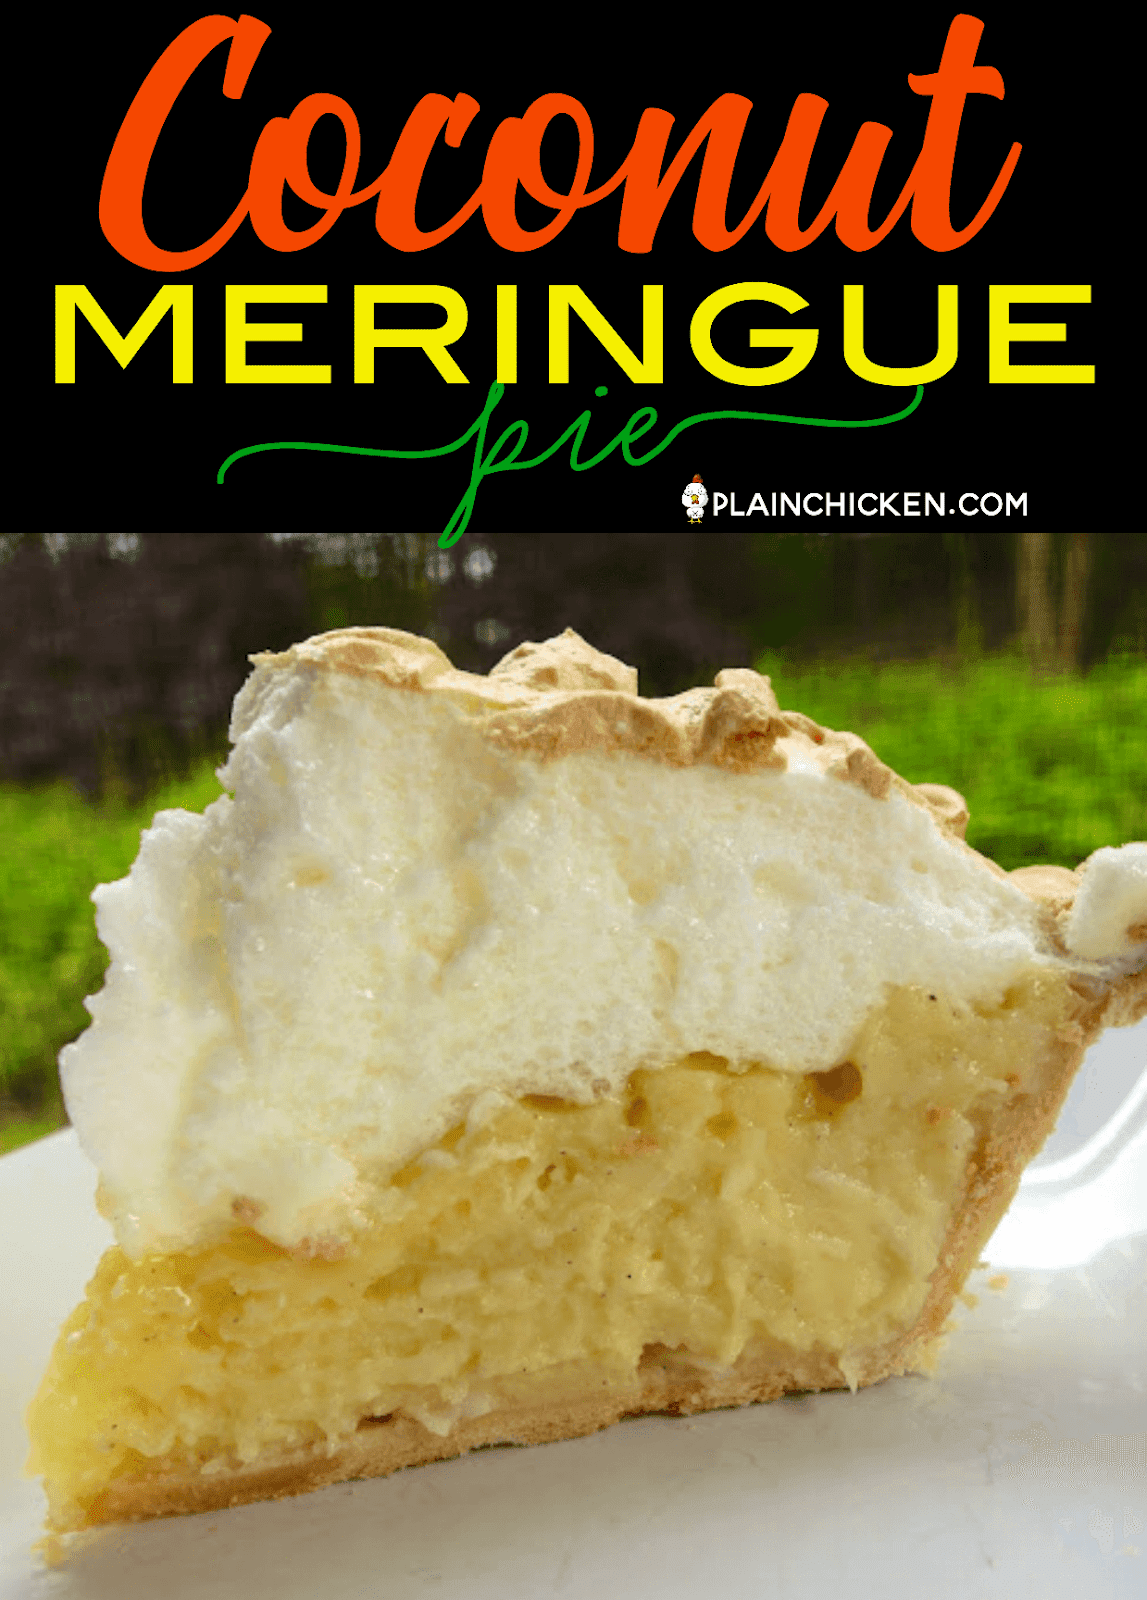 Coconut Meringue Pie - hands down the BEST coconut pie we've ever eaten! SO easy to make and it tastes amazing!!! Great for parties and and the holidays! Coconut, sugar, cornstarch, salt, milk, eggs, butter, corn syrup, vanilla, pie crust, cream of tarter. Can make the day before and refrigerate until serving. #pie #coconut